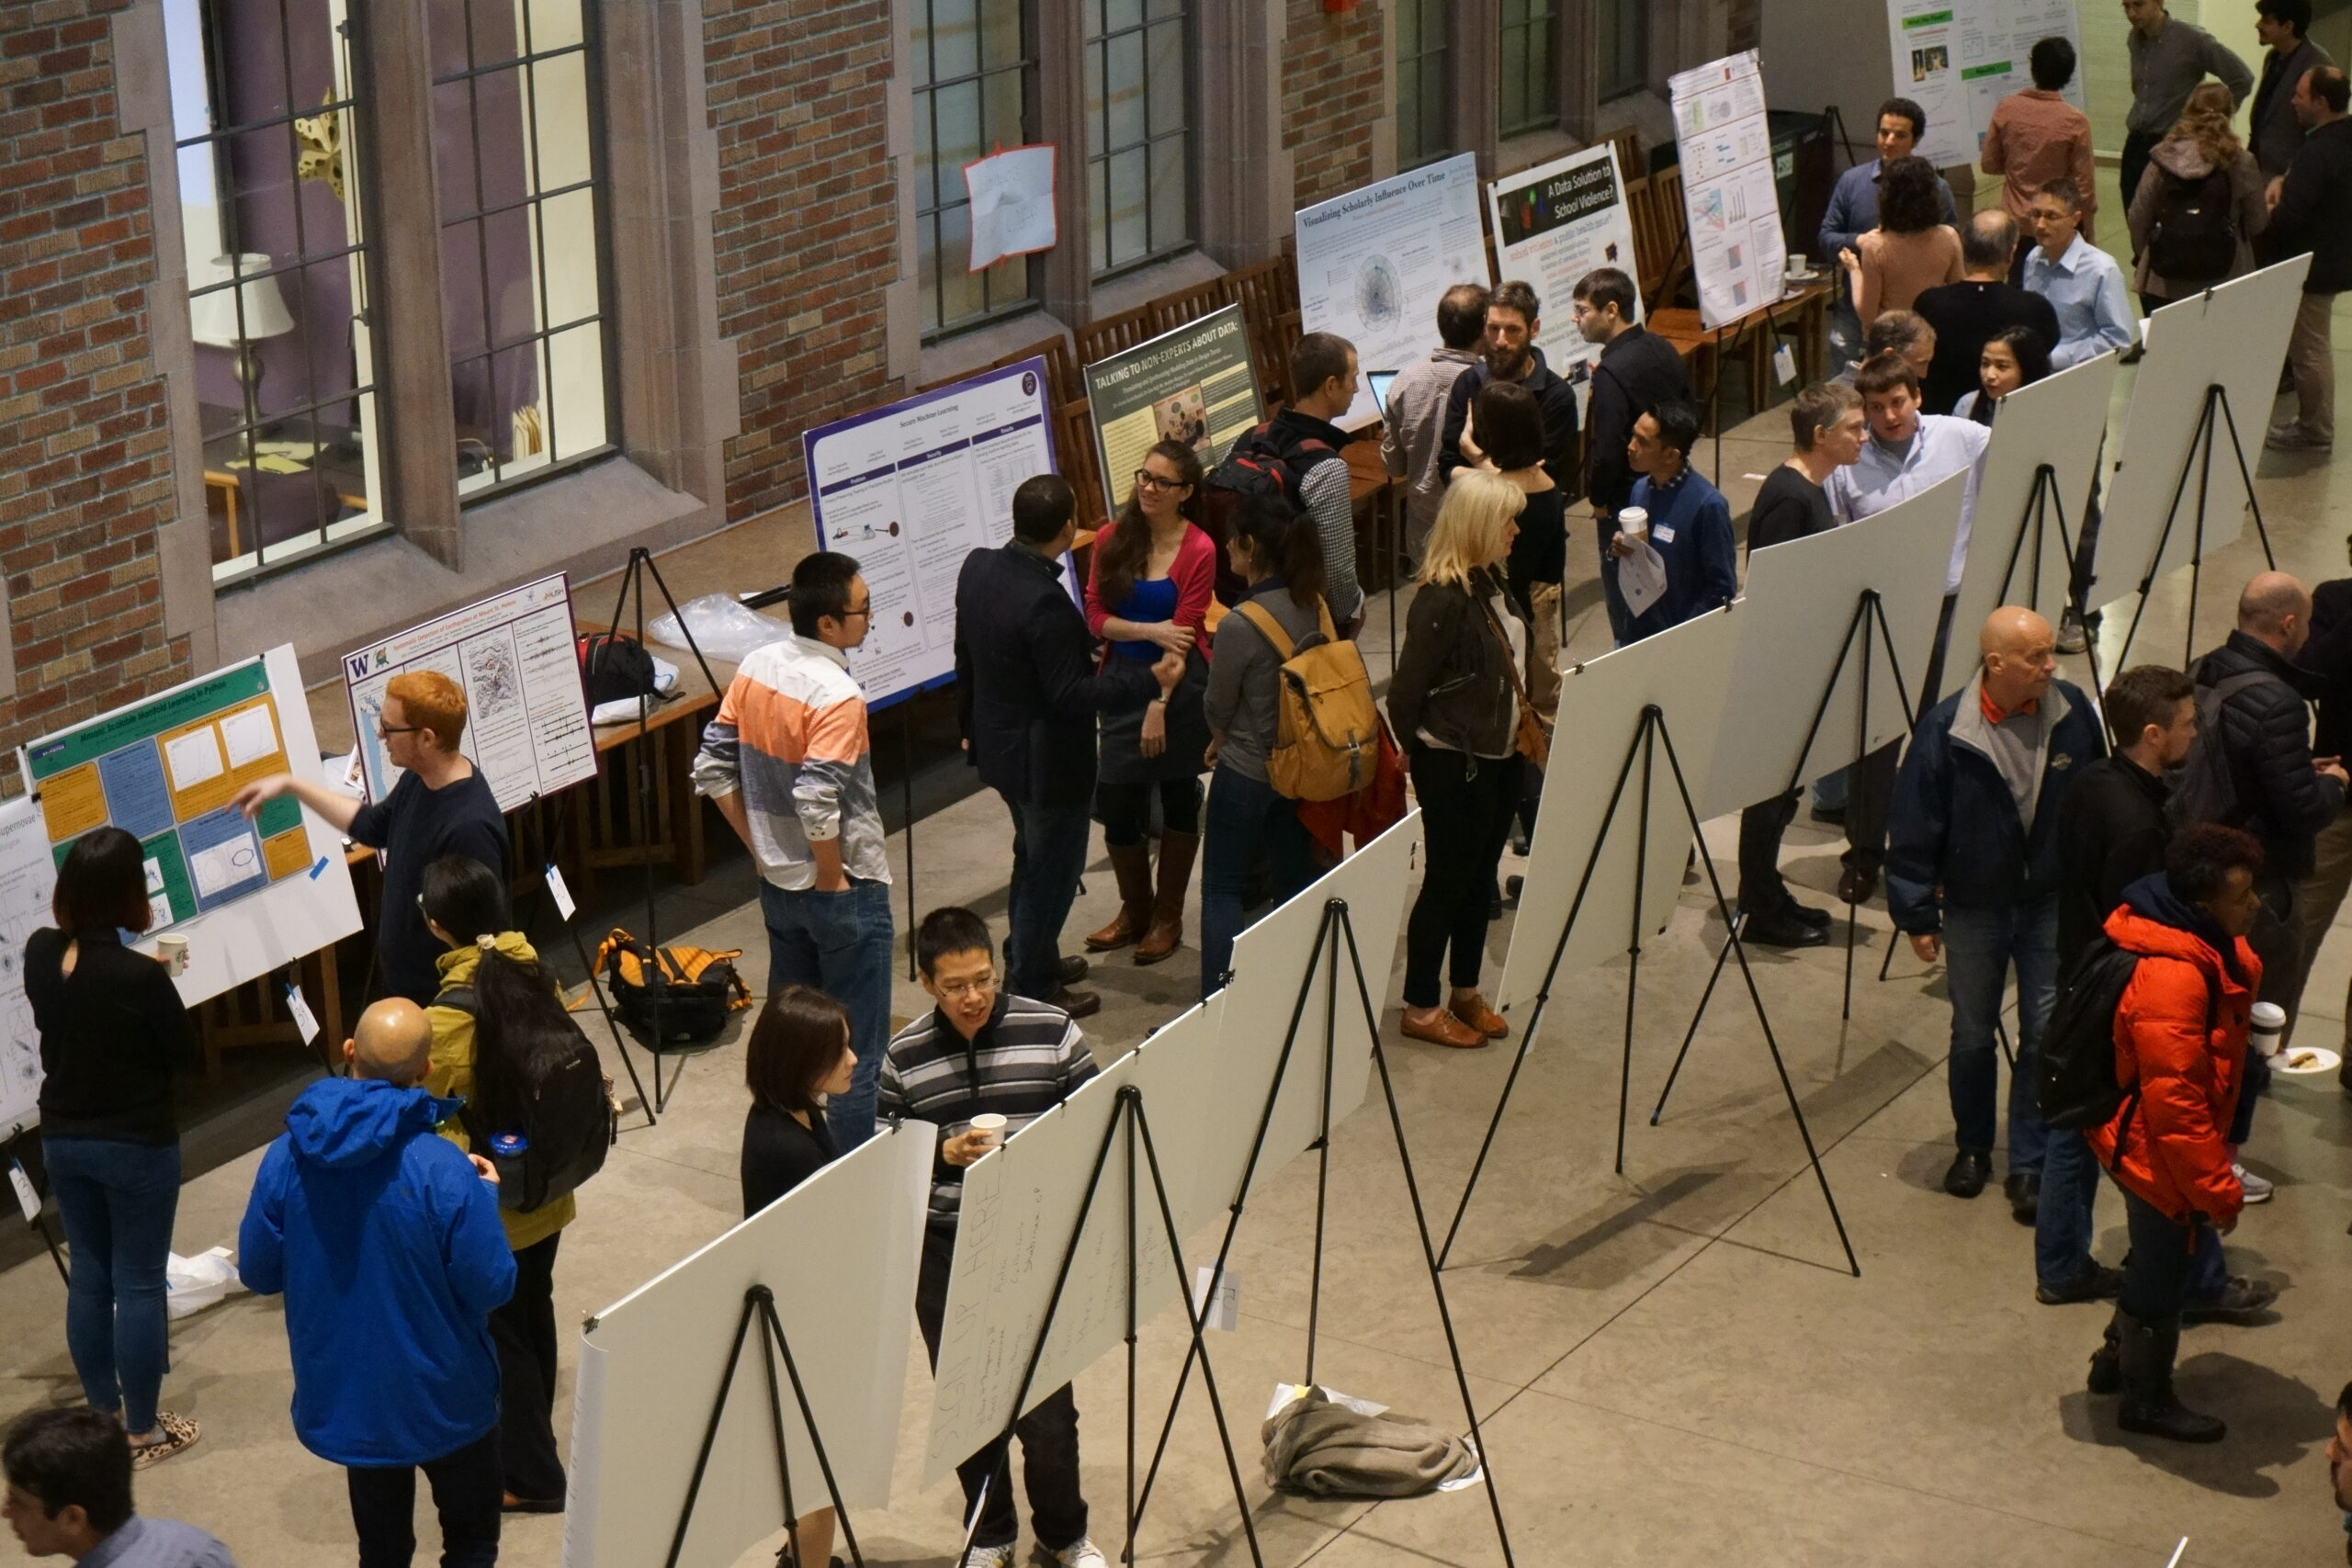 Data Science Poster Session Draws Crowds